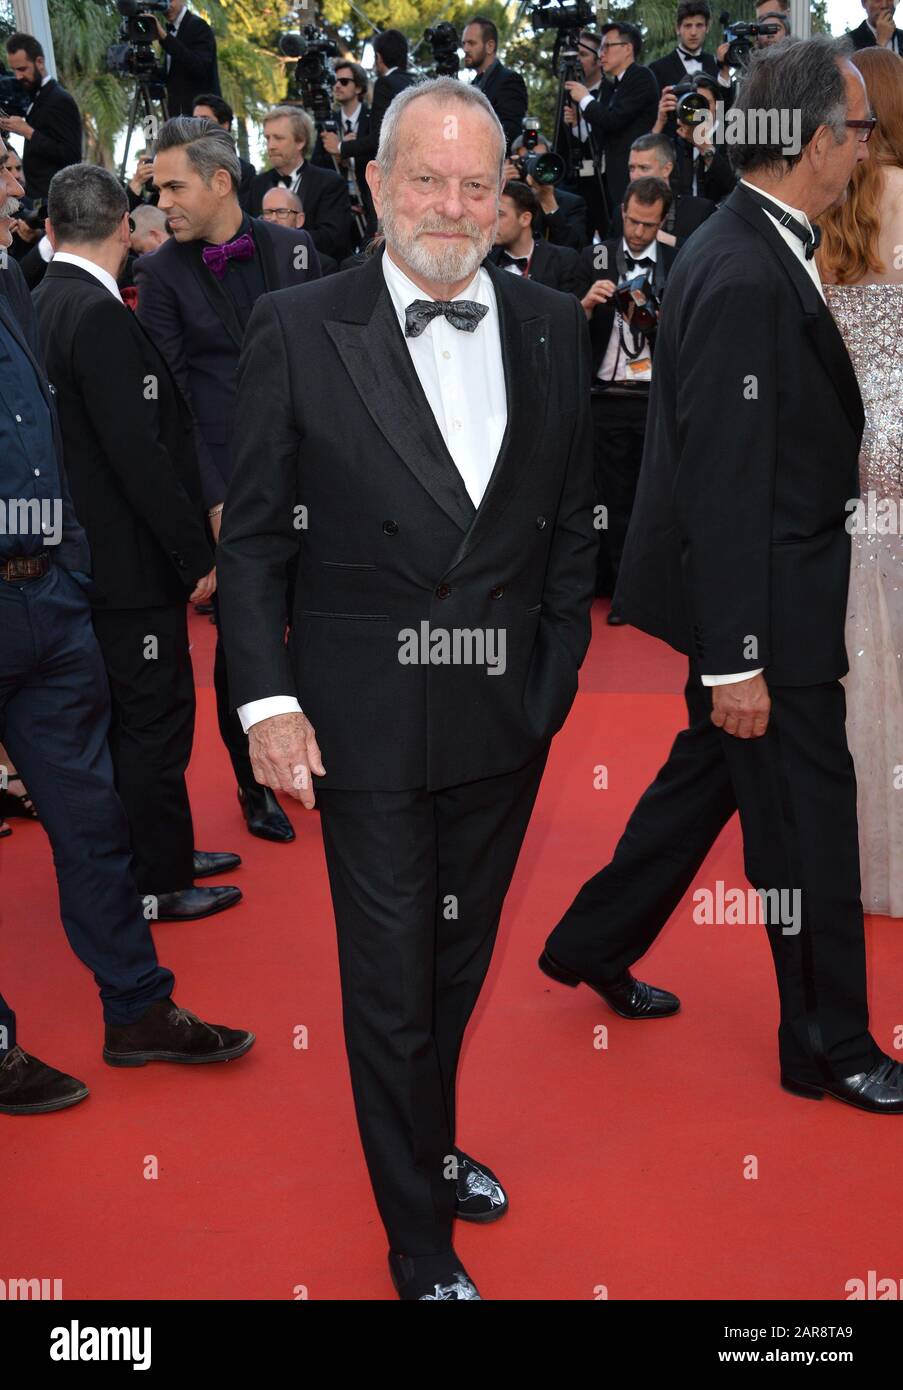 CANNES, FRANCE - MAY 17, 2016: Monty Python star Terry Gilliam at the gala premiere of Pedro Almodovar's 'Julieta' at the 69th Festival de Cannes. Stock Photo